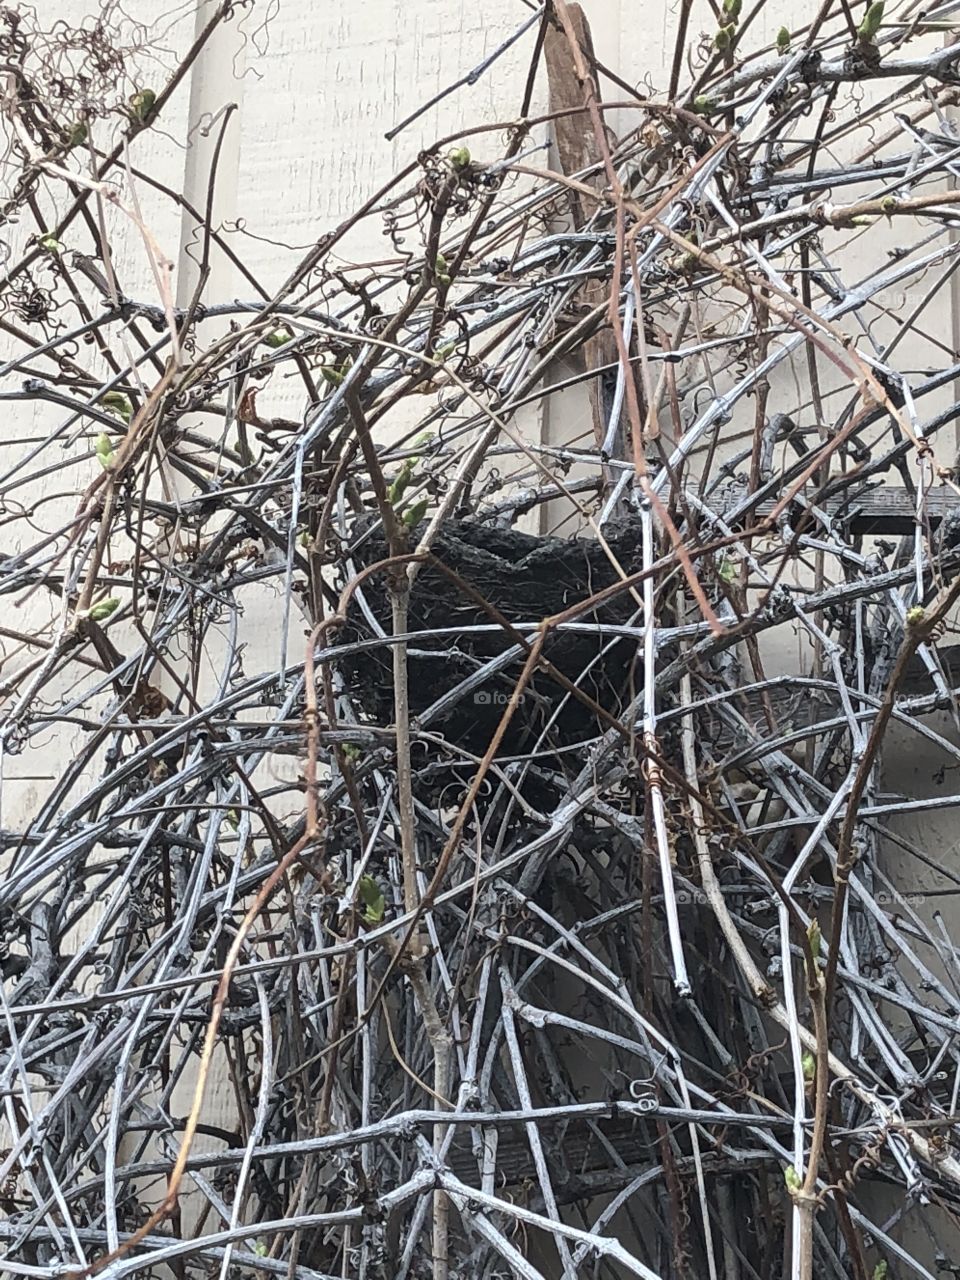 Nest in the vines